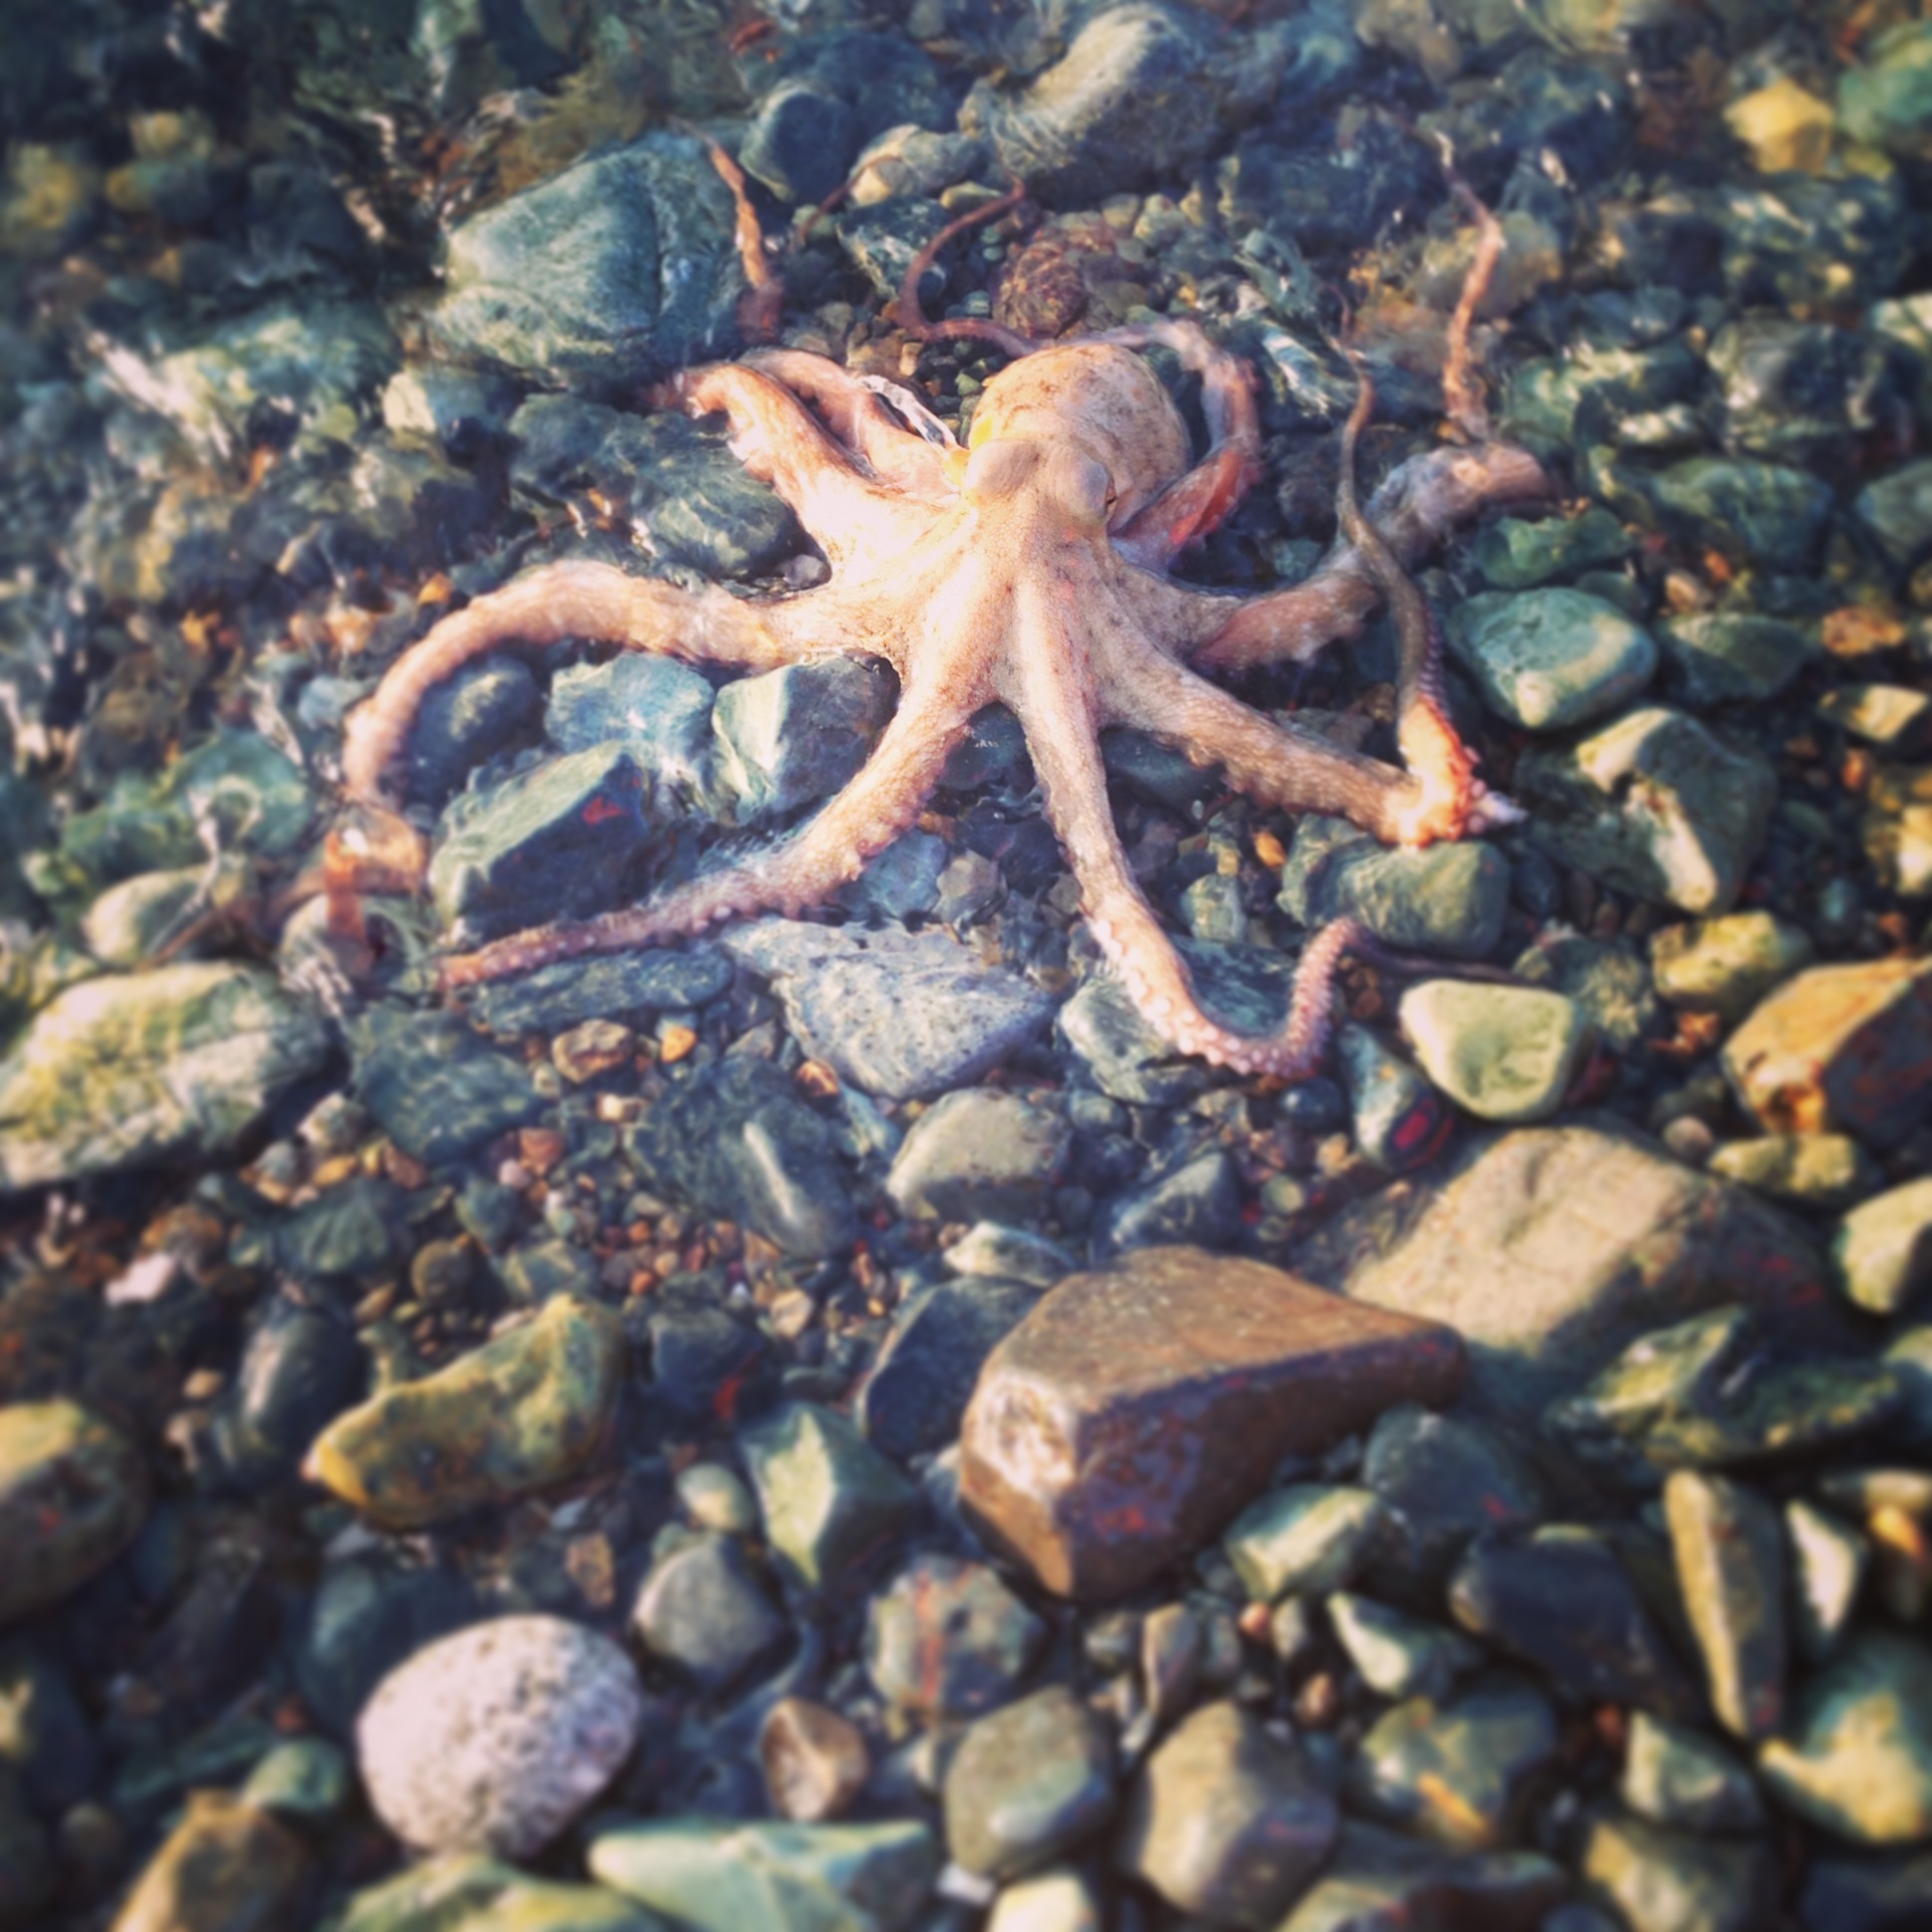 The defensive octopus from the beach.